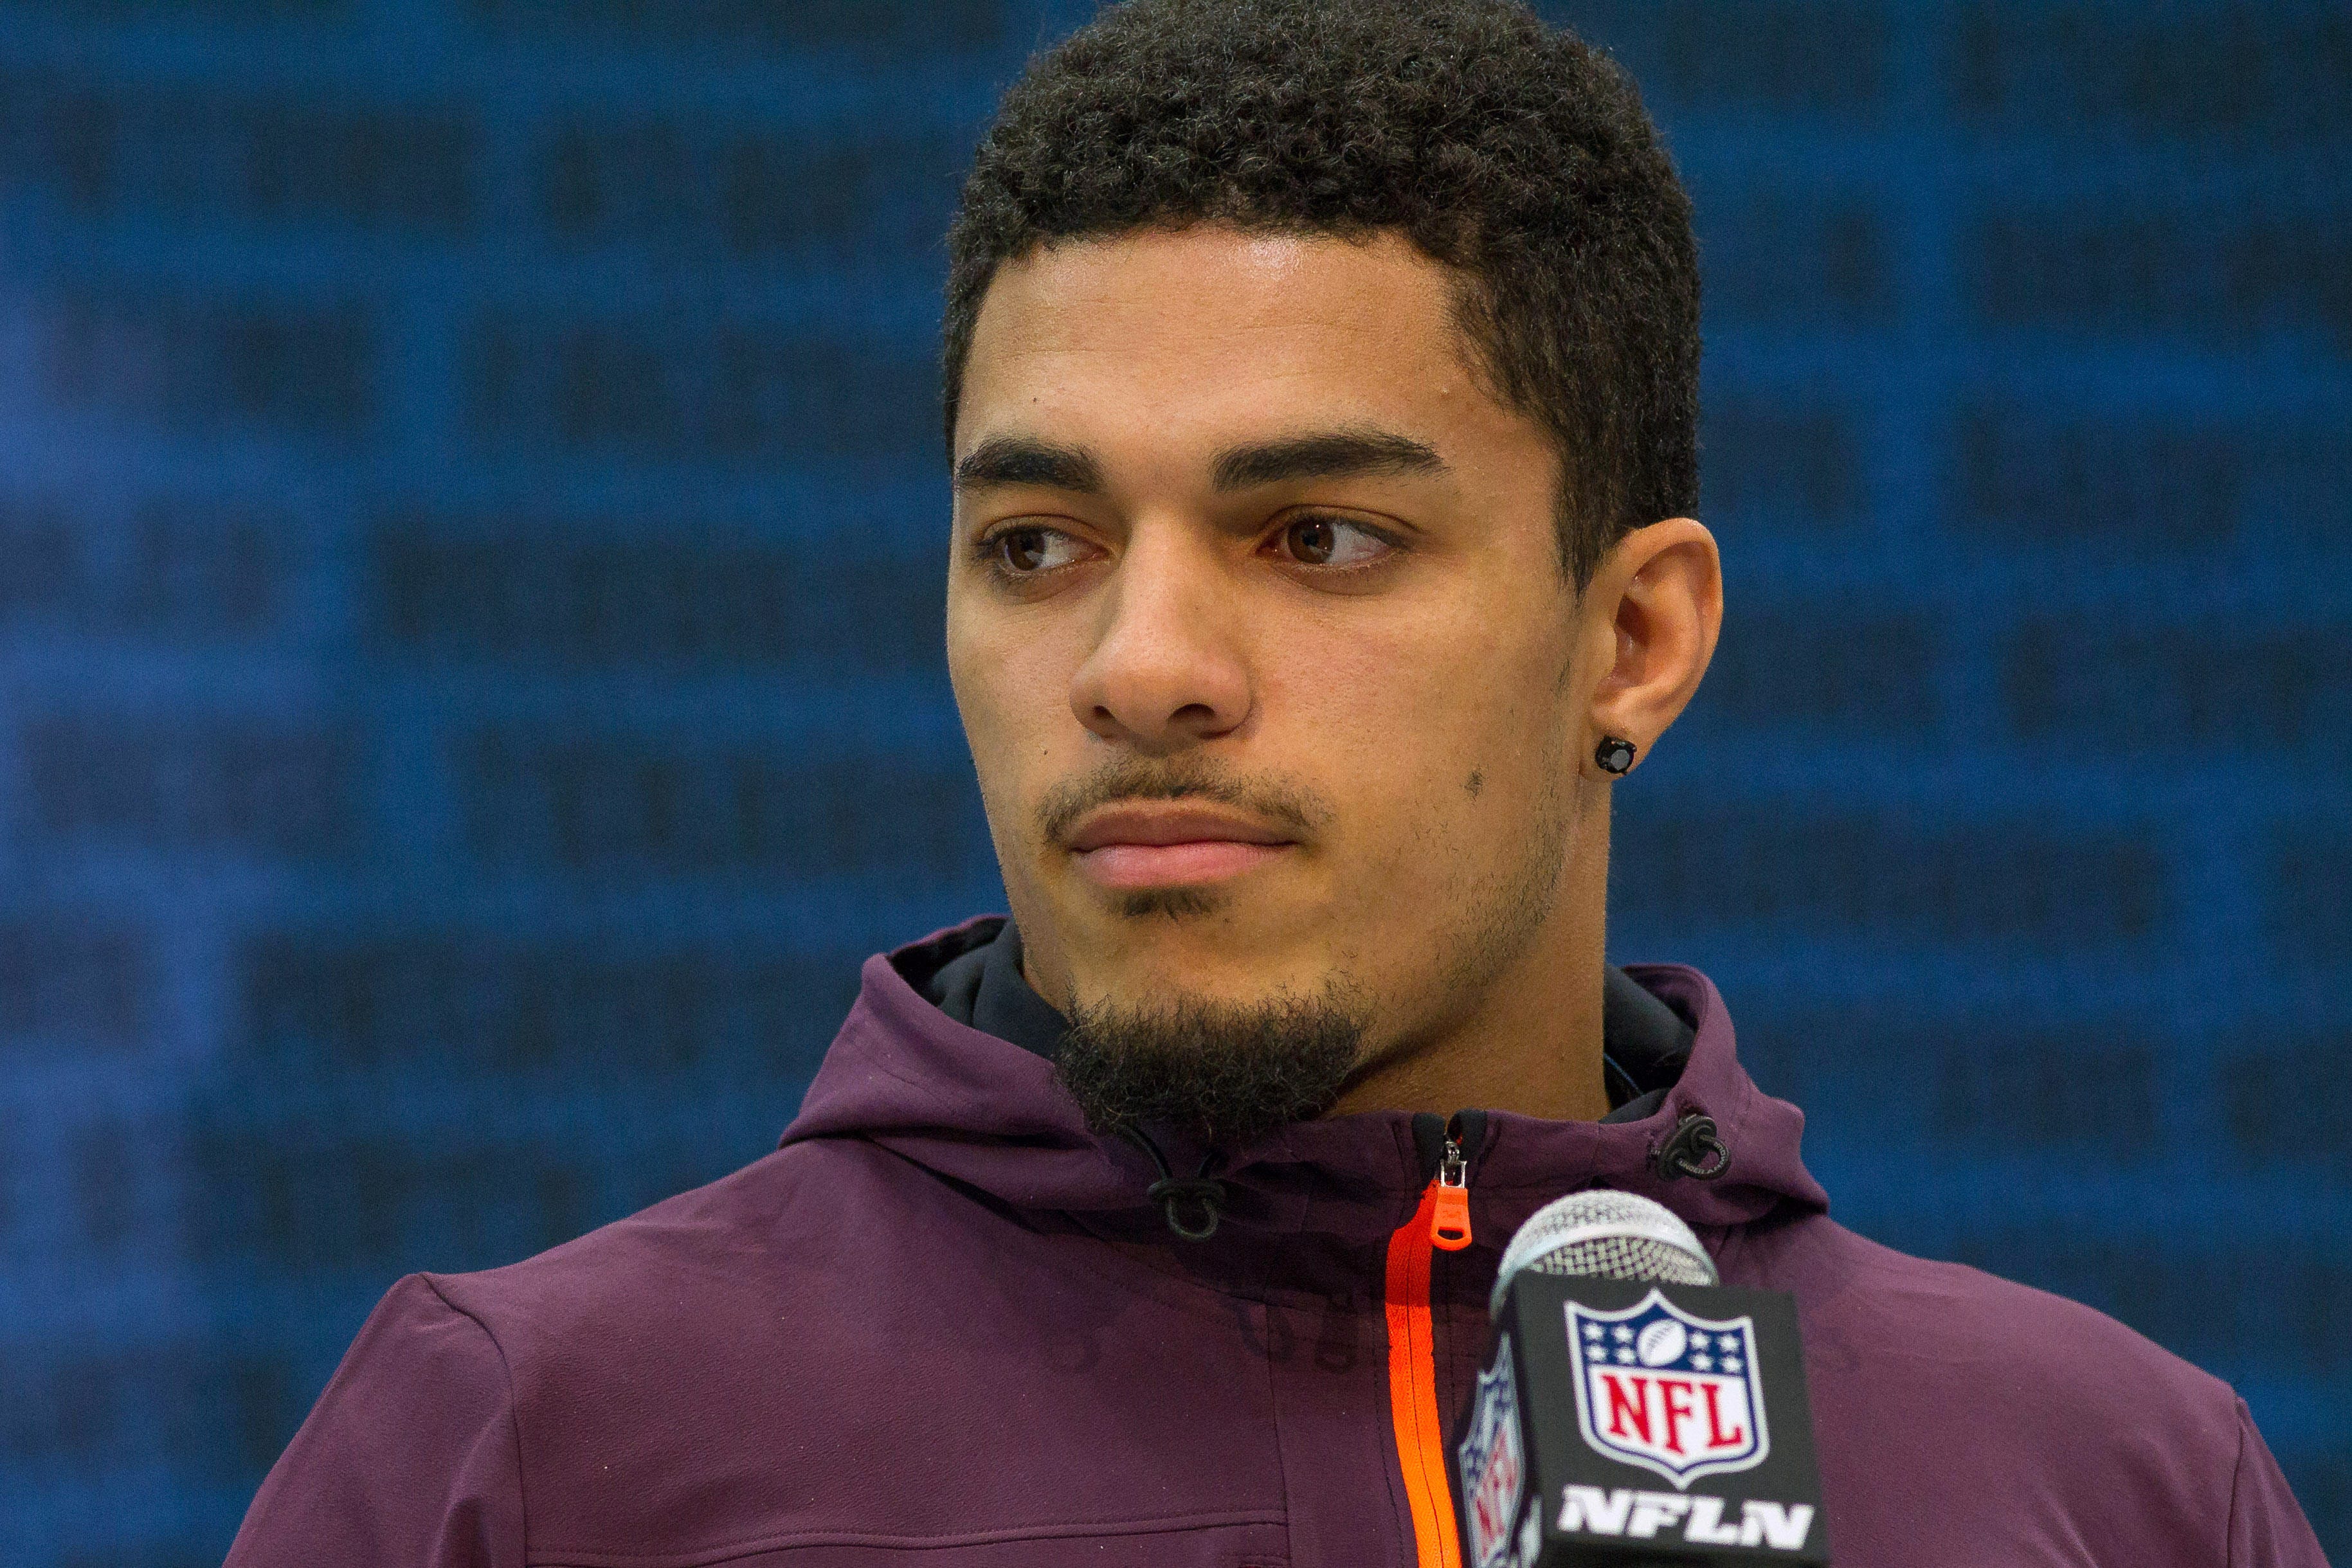 Iowa defensive back Amani Hooker speaks to media during the 2019 NFL Combine at the Indiana Convention Center.